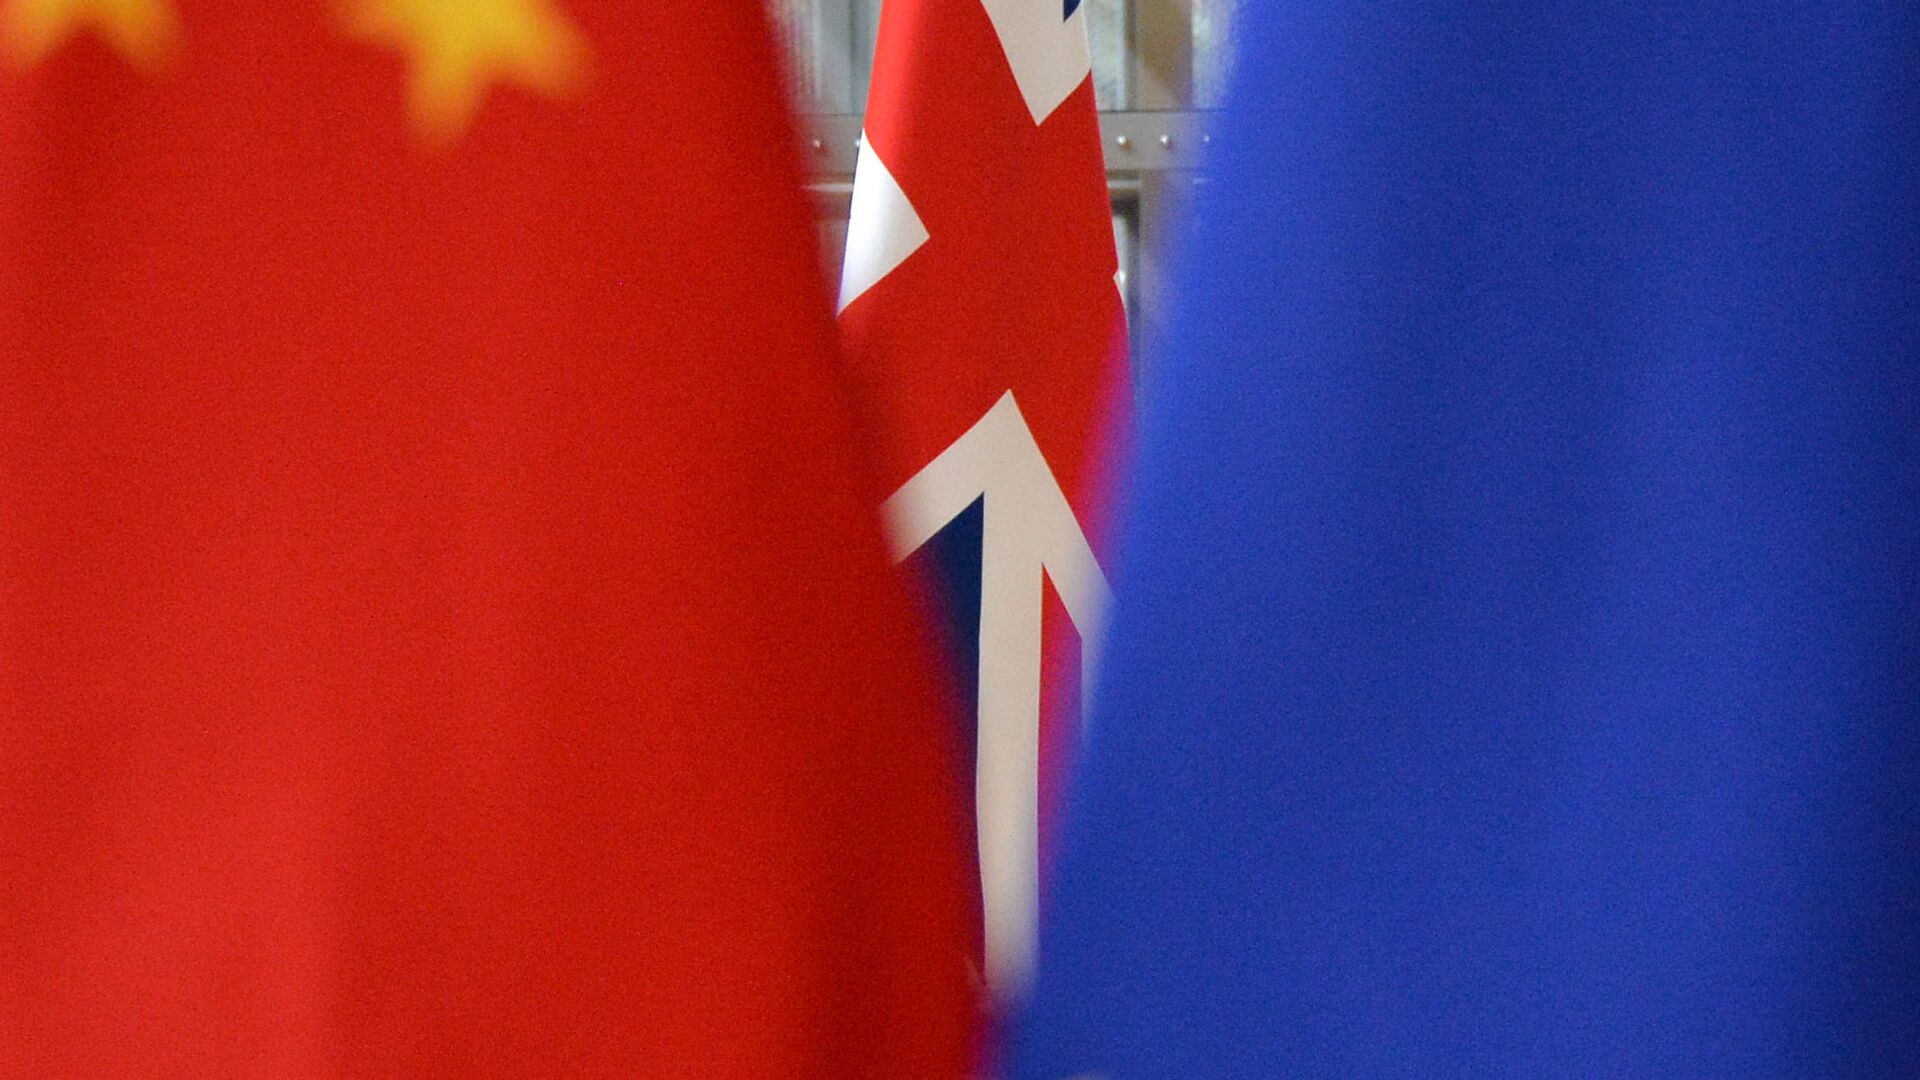 European Union and Chinese flags are pictured during an annual EU-China summit in Brussels, Belgium. - Sputnik International, 1920, 25.03.2021